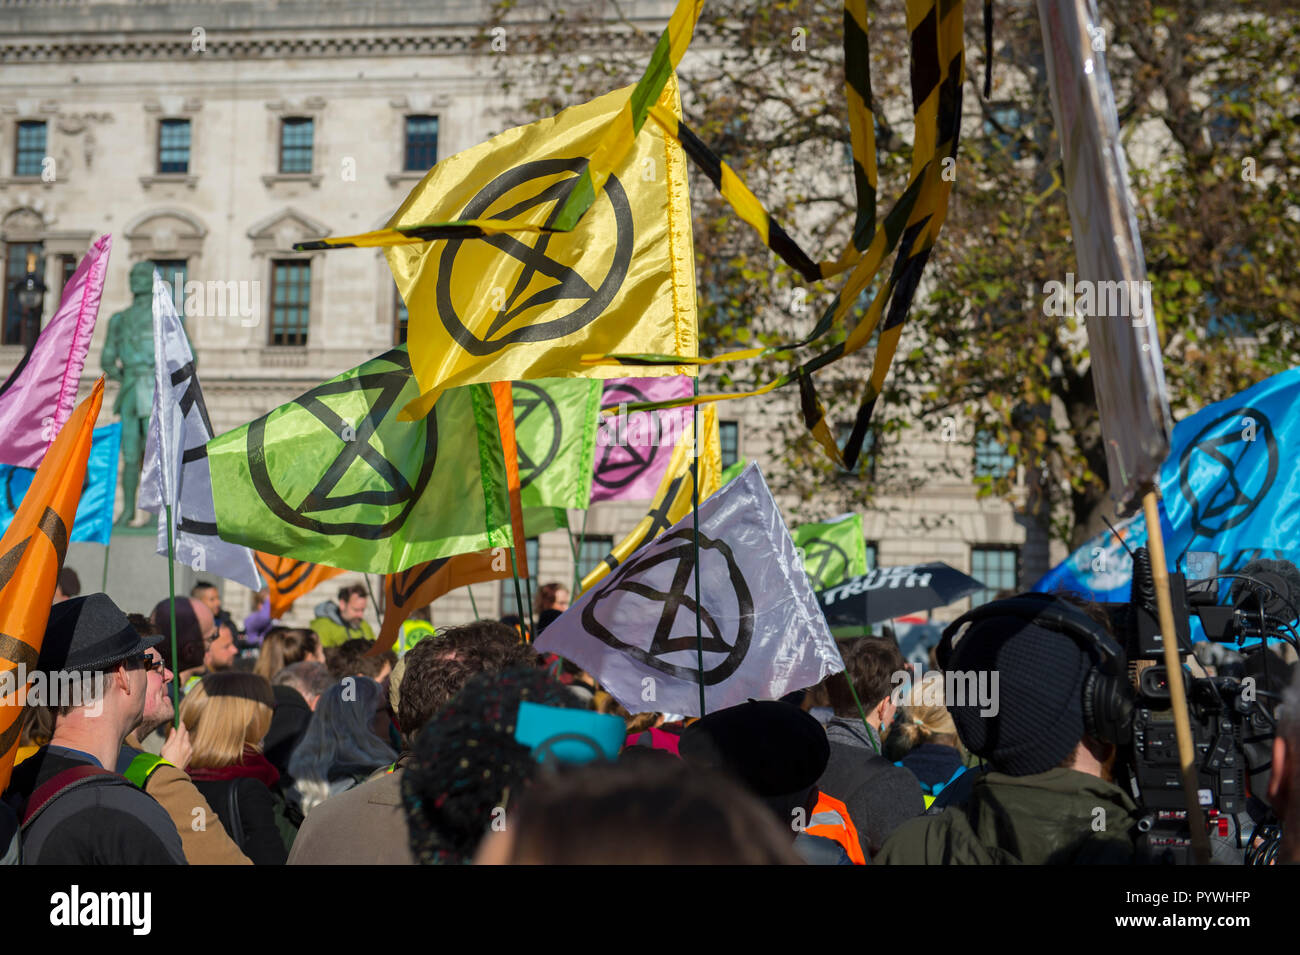 Parliament Square, London, UK. 31 October, 2018. Extinction Rebellion, a new pressure group, is calling for civil disobedience in the UK in November to draw attention to the climate change emergency facing the planet. They call a Declaration of Rebellion at Parliament Square on 31 October 2018. Credit: Malcolm Park/Alamy Live News. Stock Photo